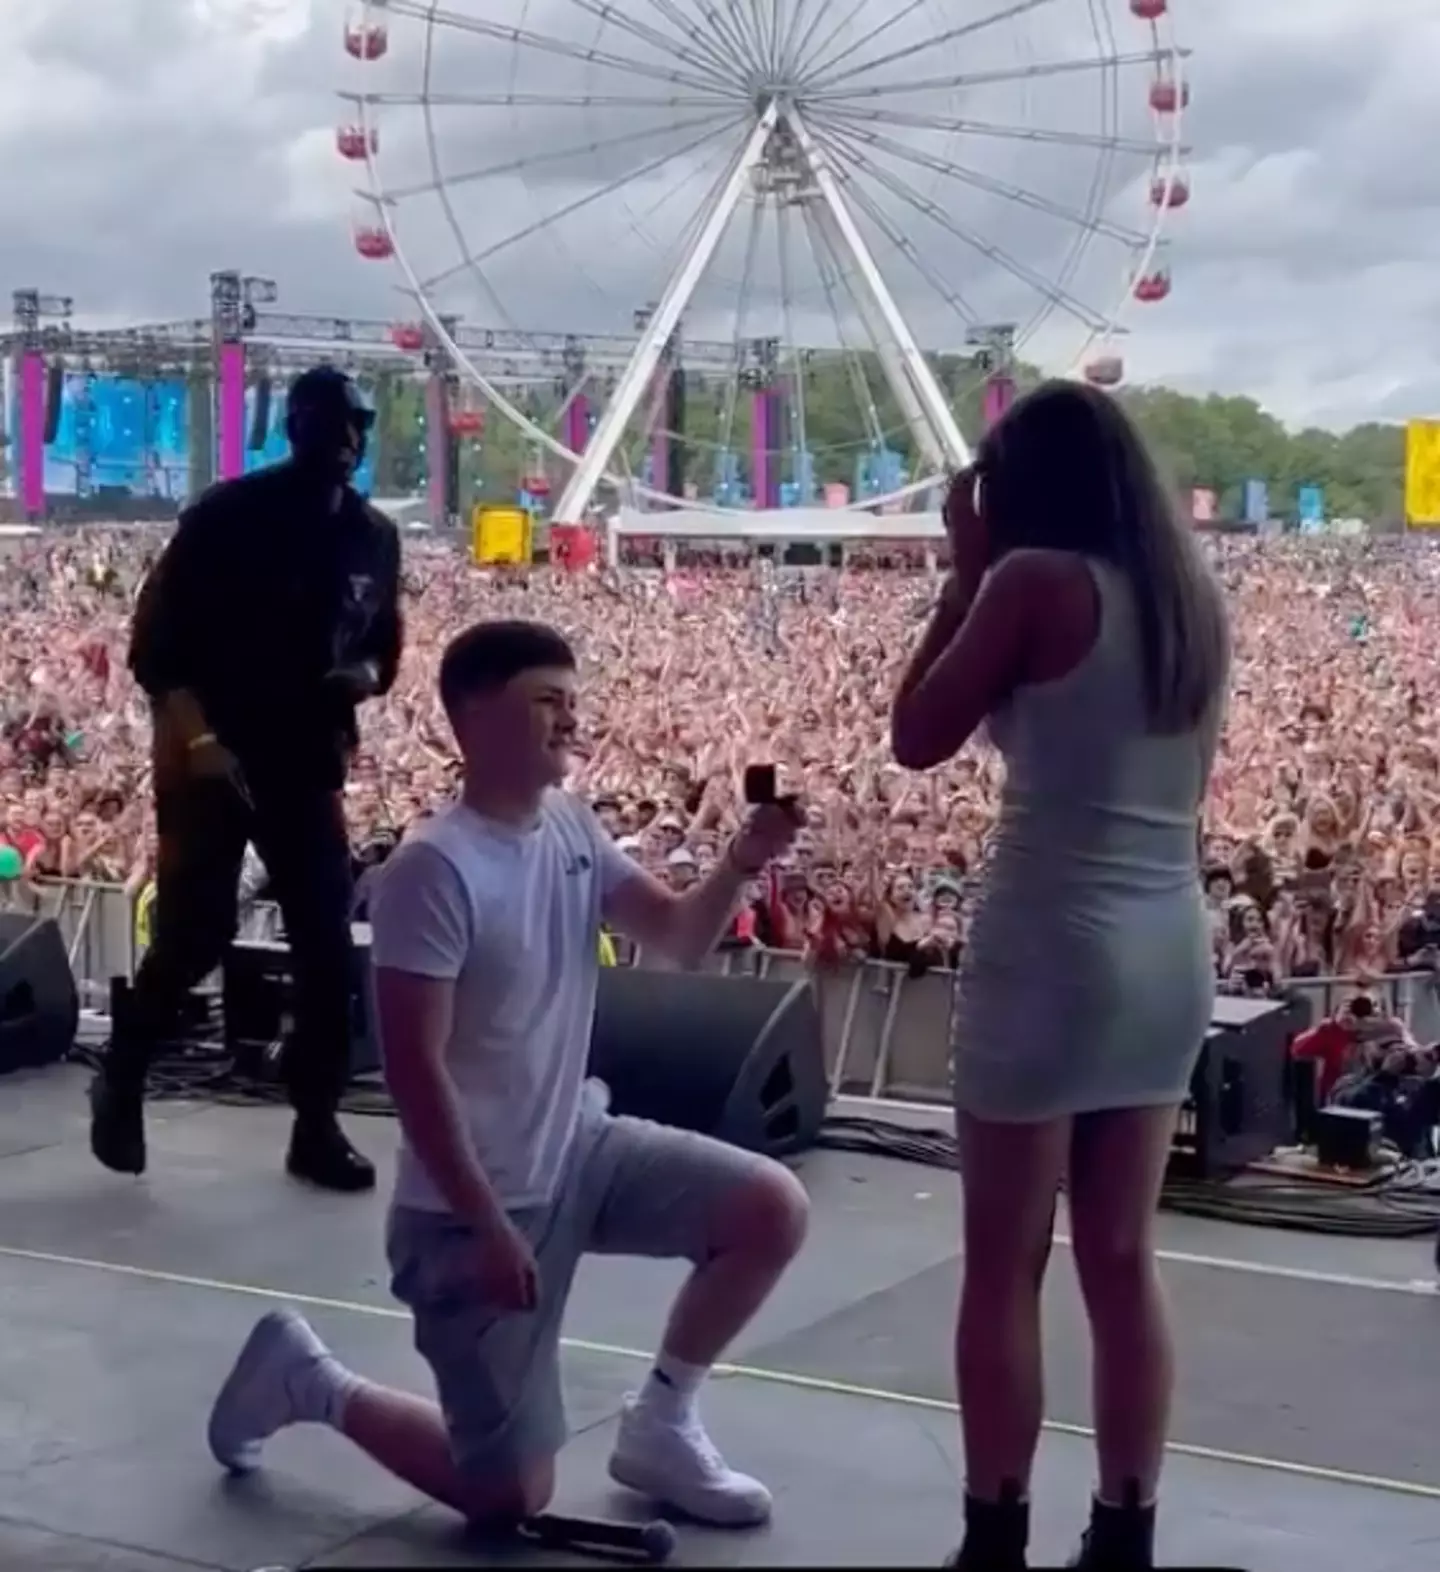 Myles Goodfellow proposed to his long-term girlfriend, Indy Geraghty, in front of around 80,000 people at this year's Parklife festival.